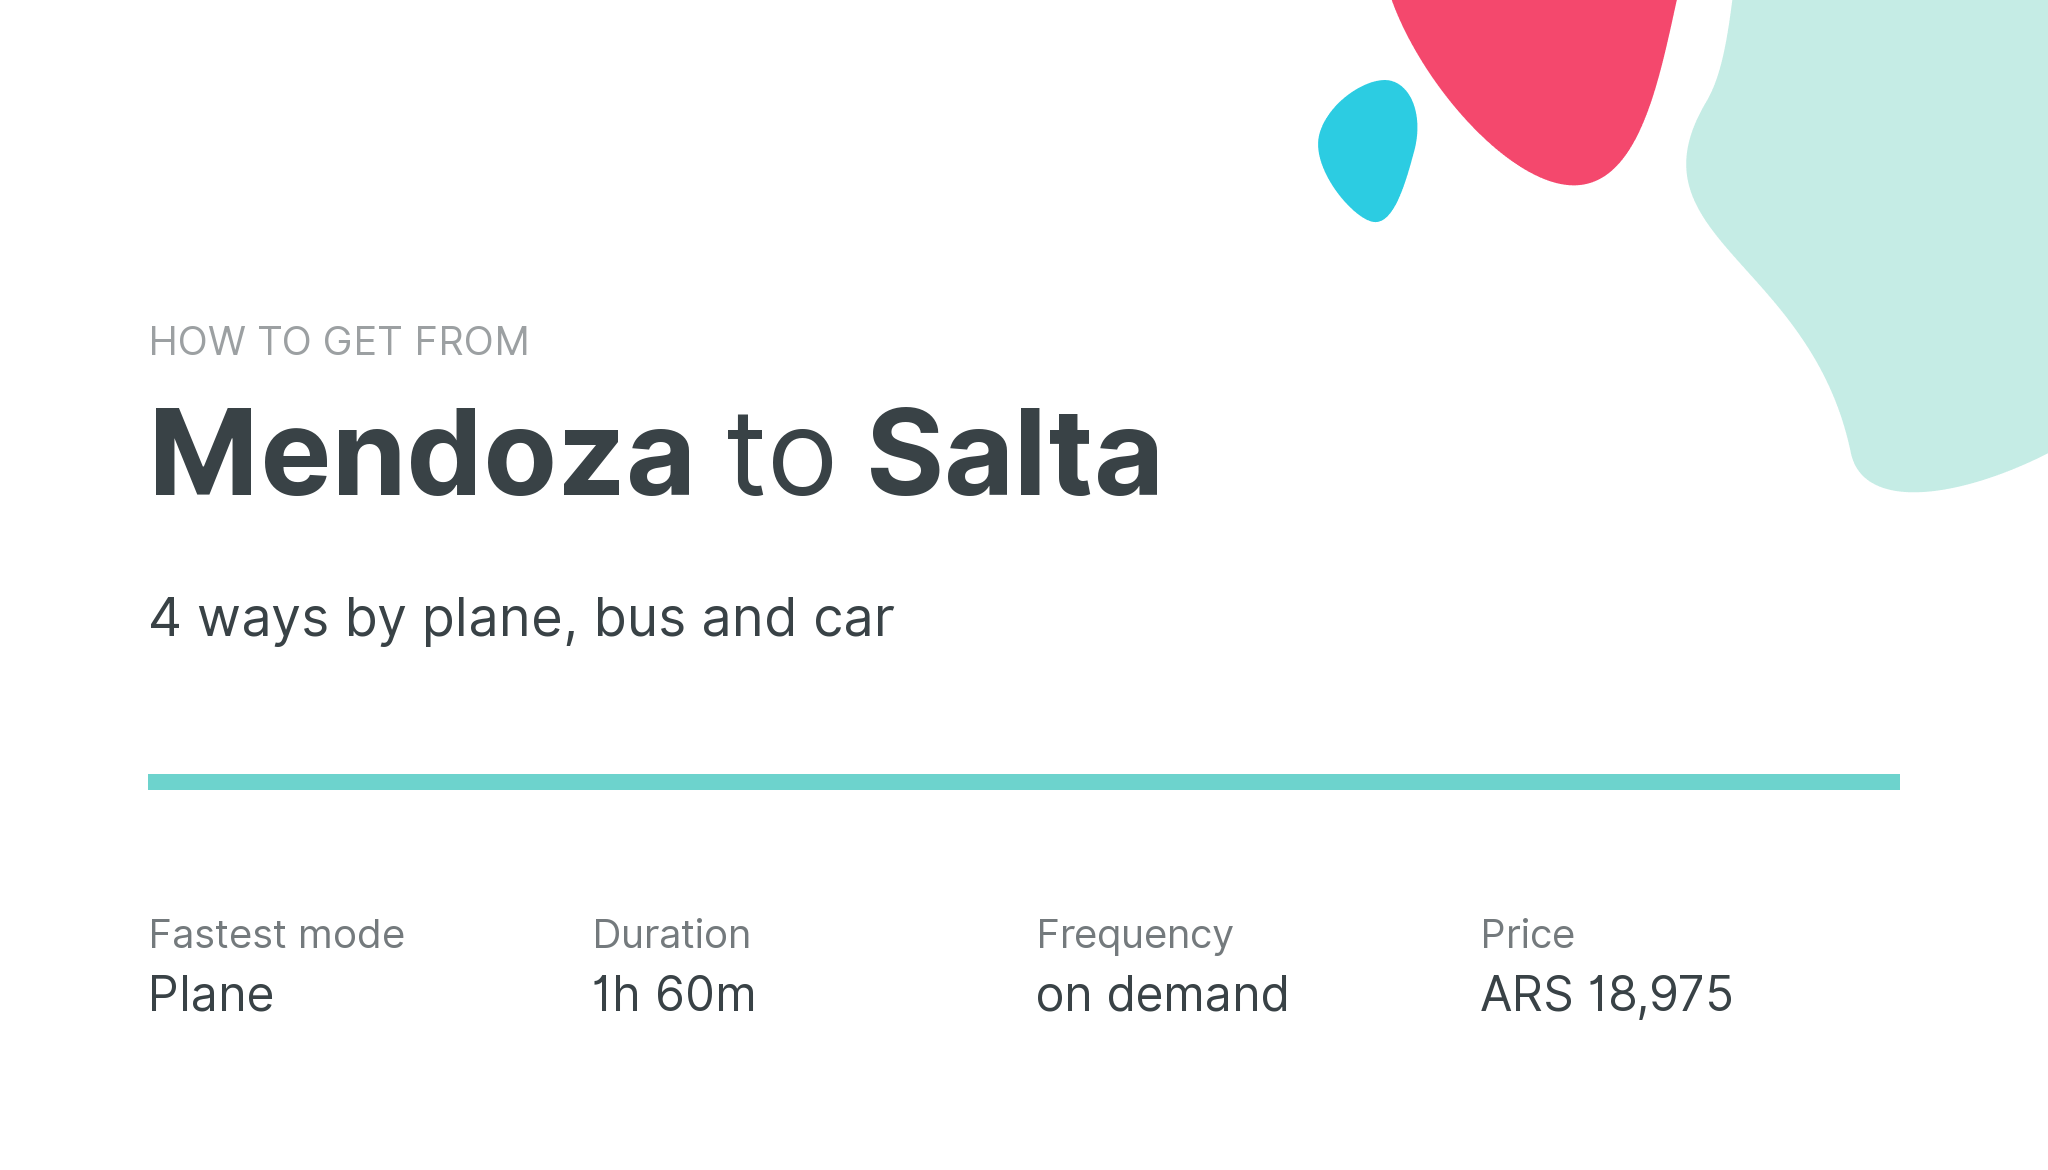 How do I get from Mendoza to Salta